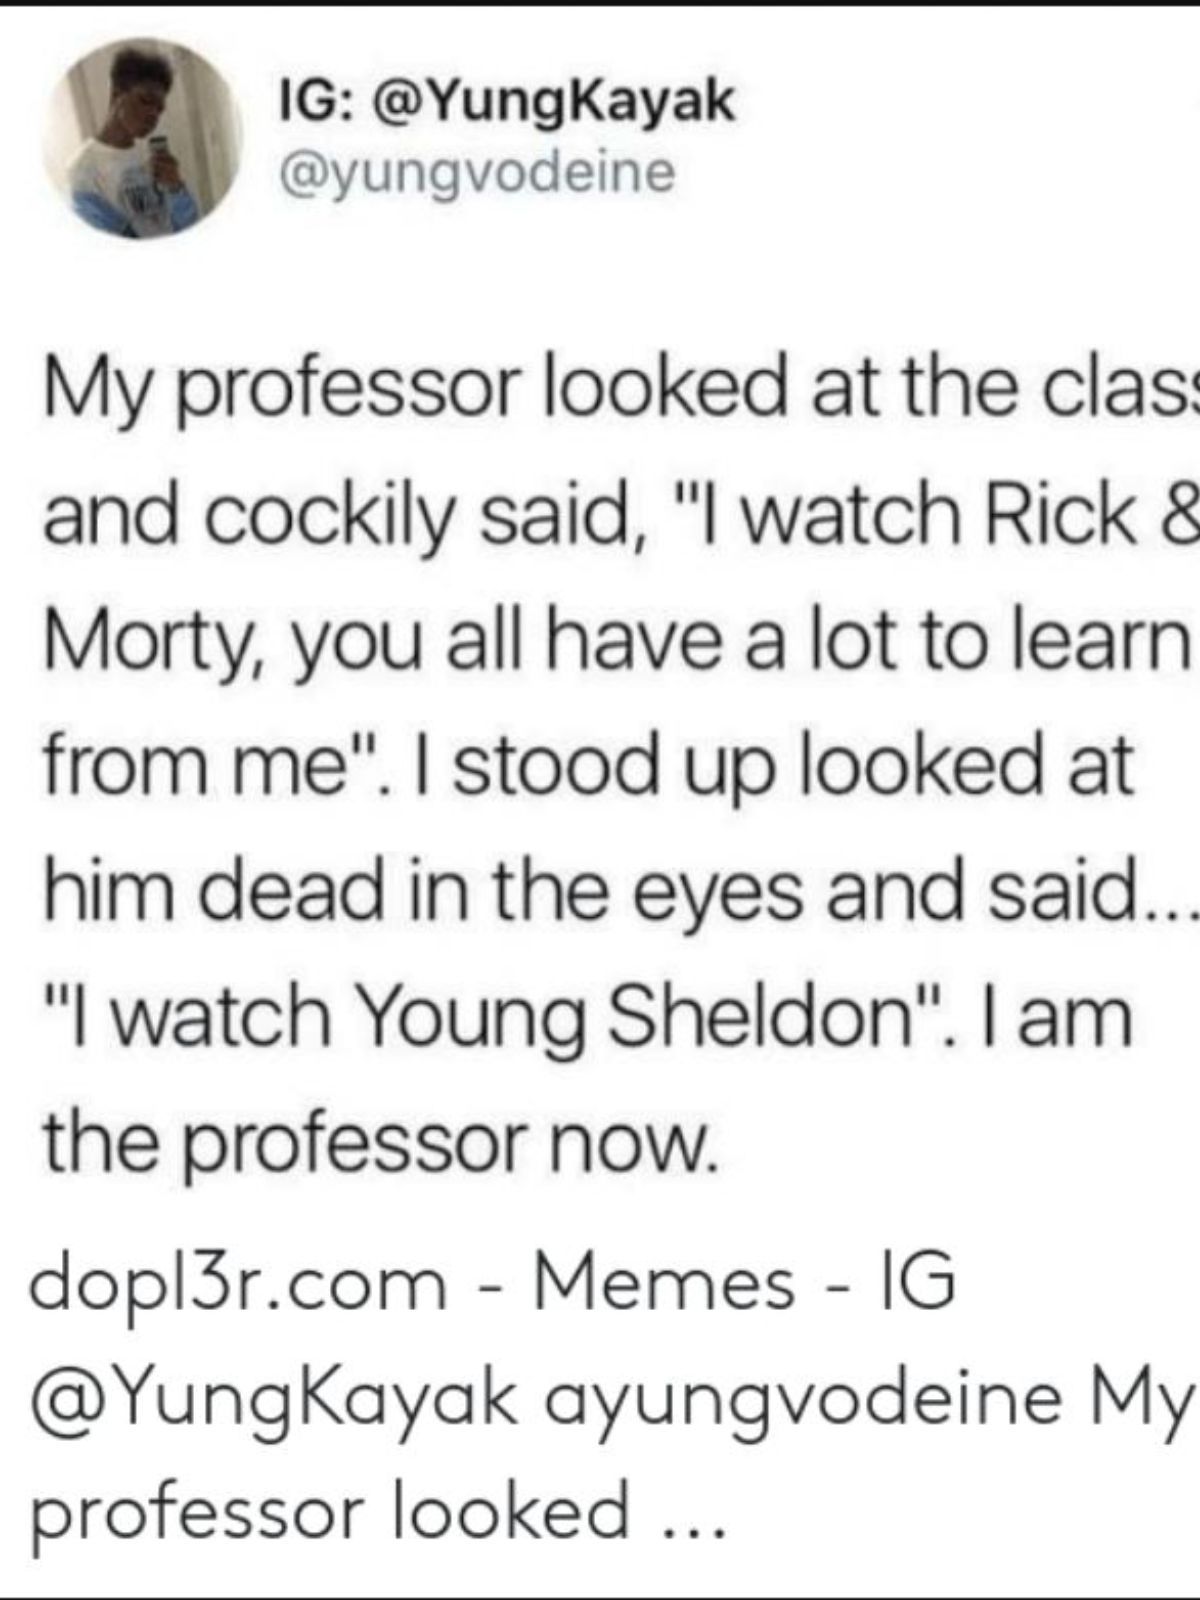 Meme referring to Young Sheldon versus Rick and Morty